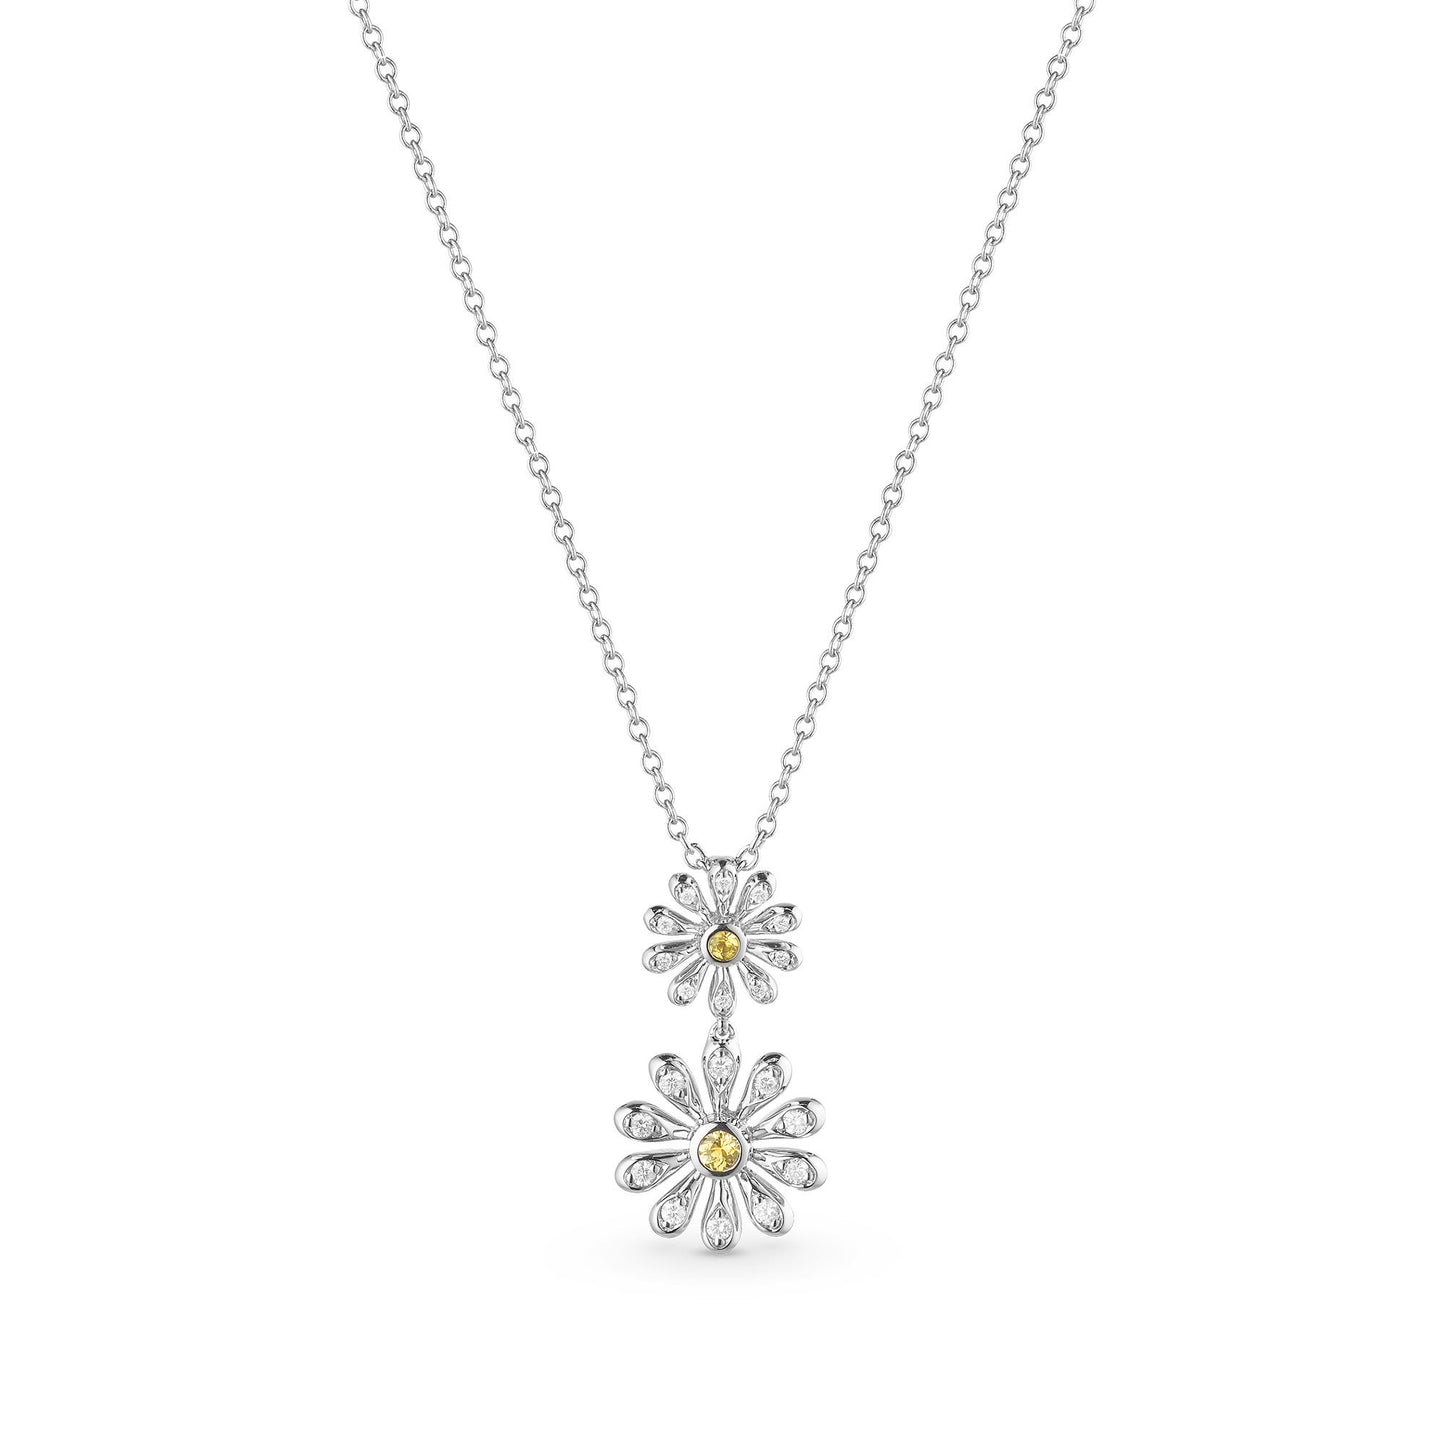 Mini Daisy Double Pendant in 18ct White Gold with Yellow Sapphire and Diamonds